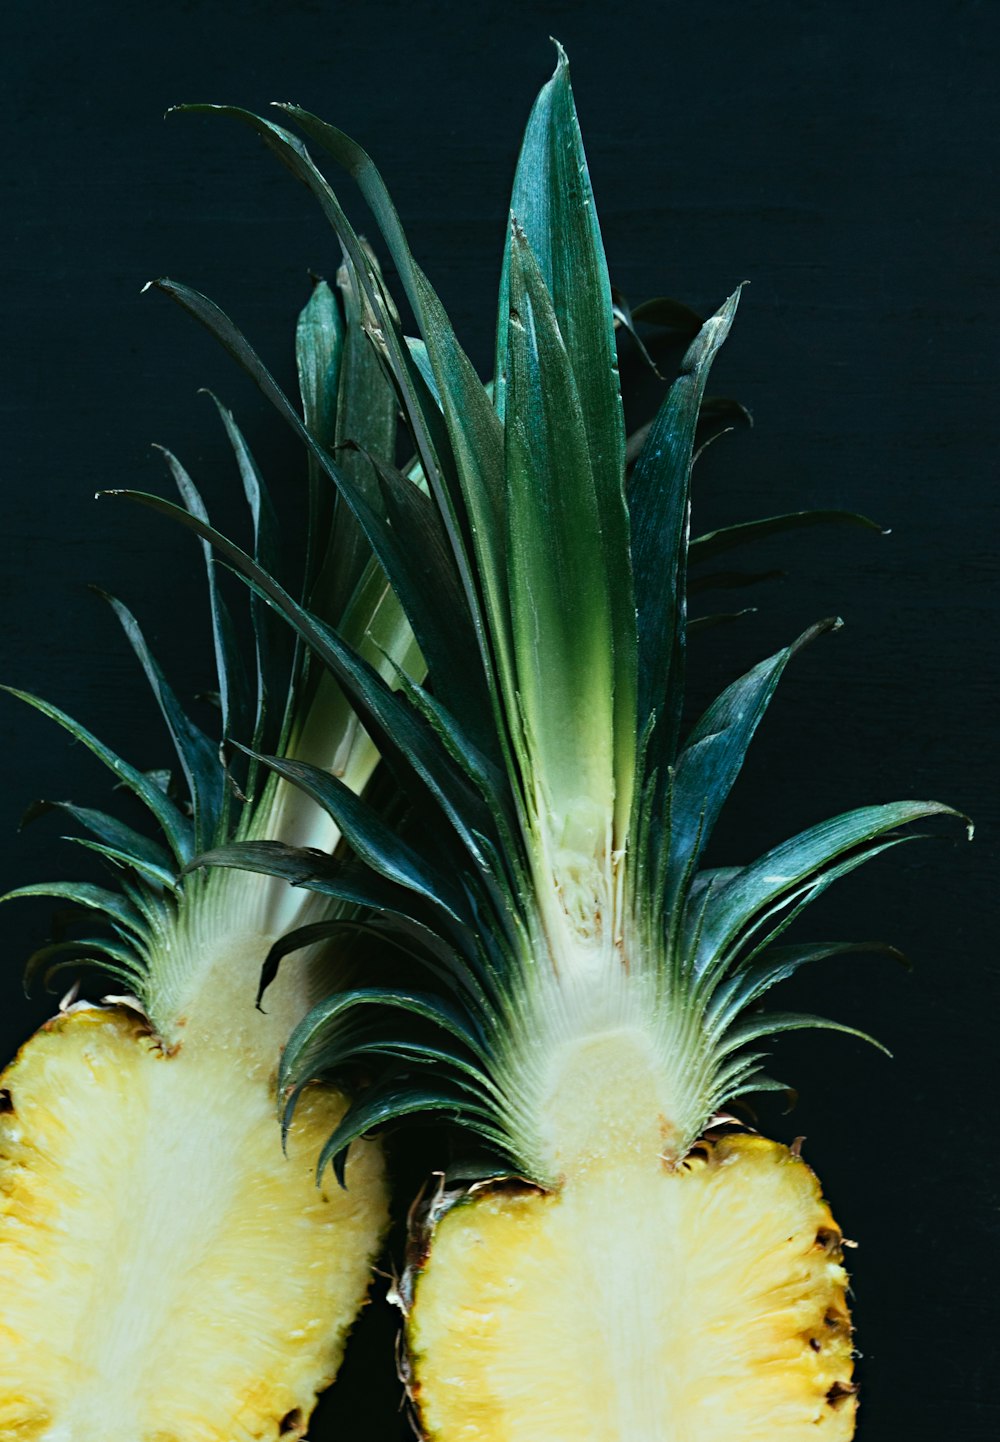 pineapple slices with crown